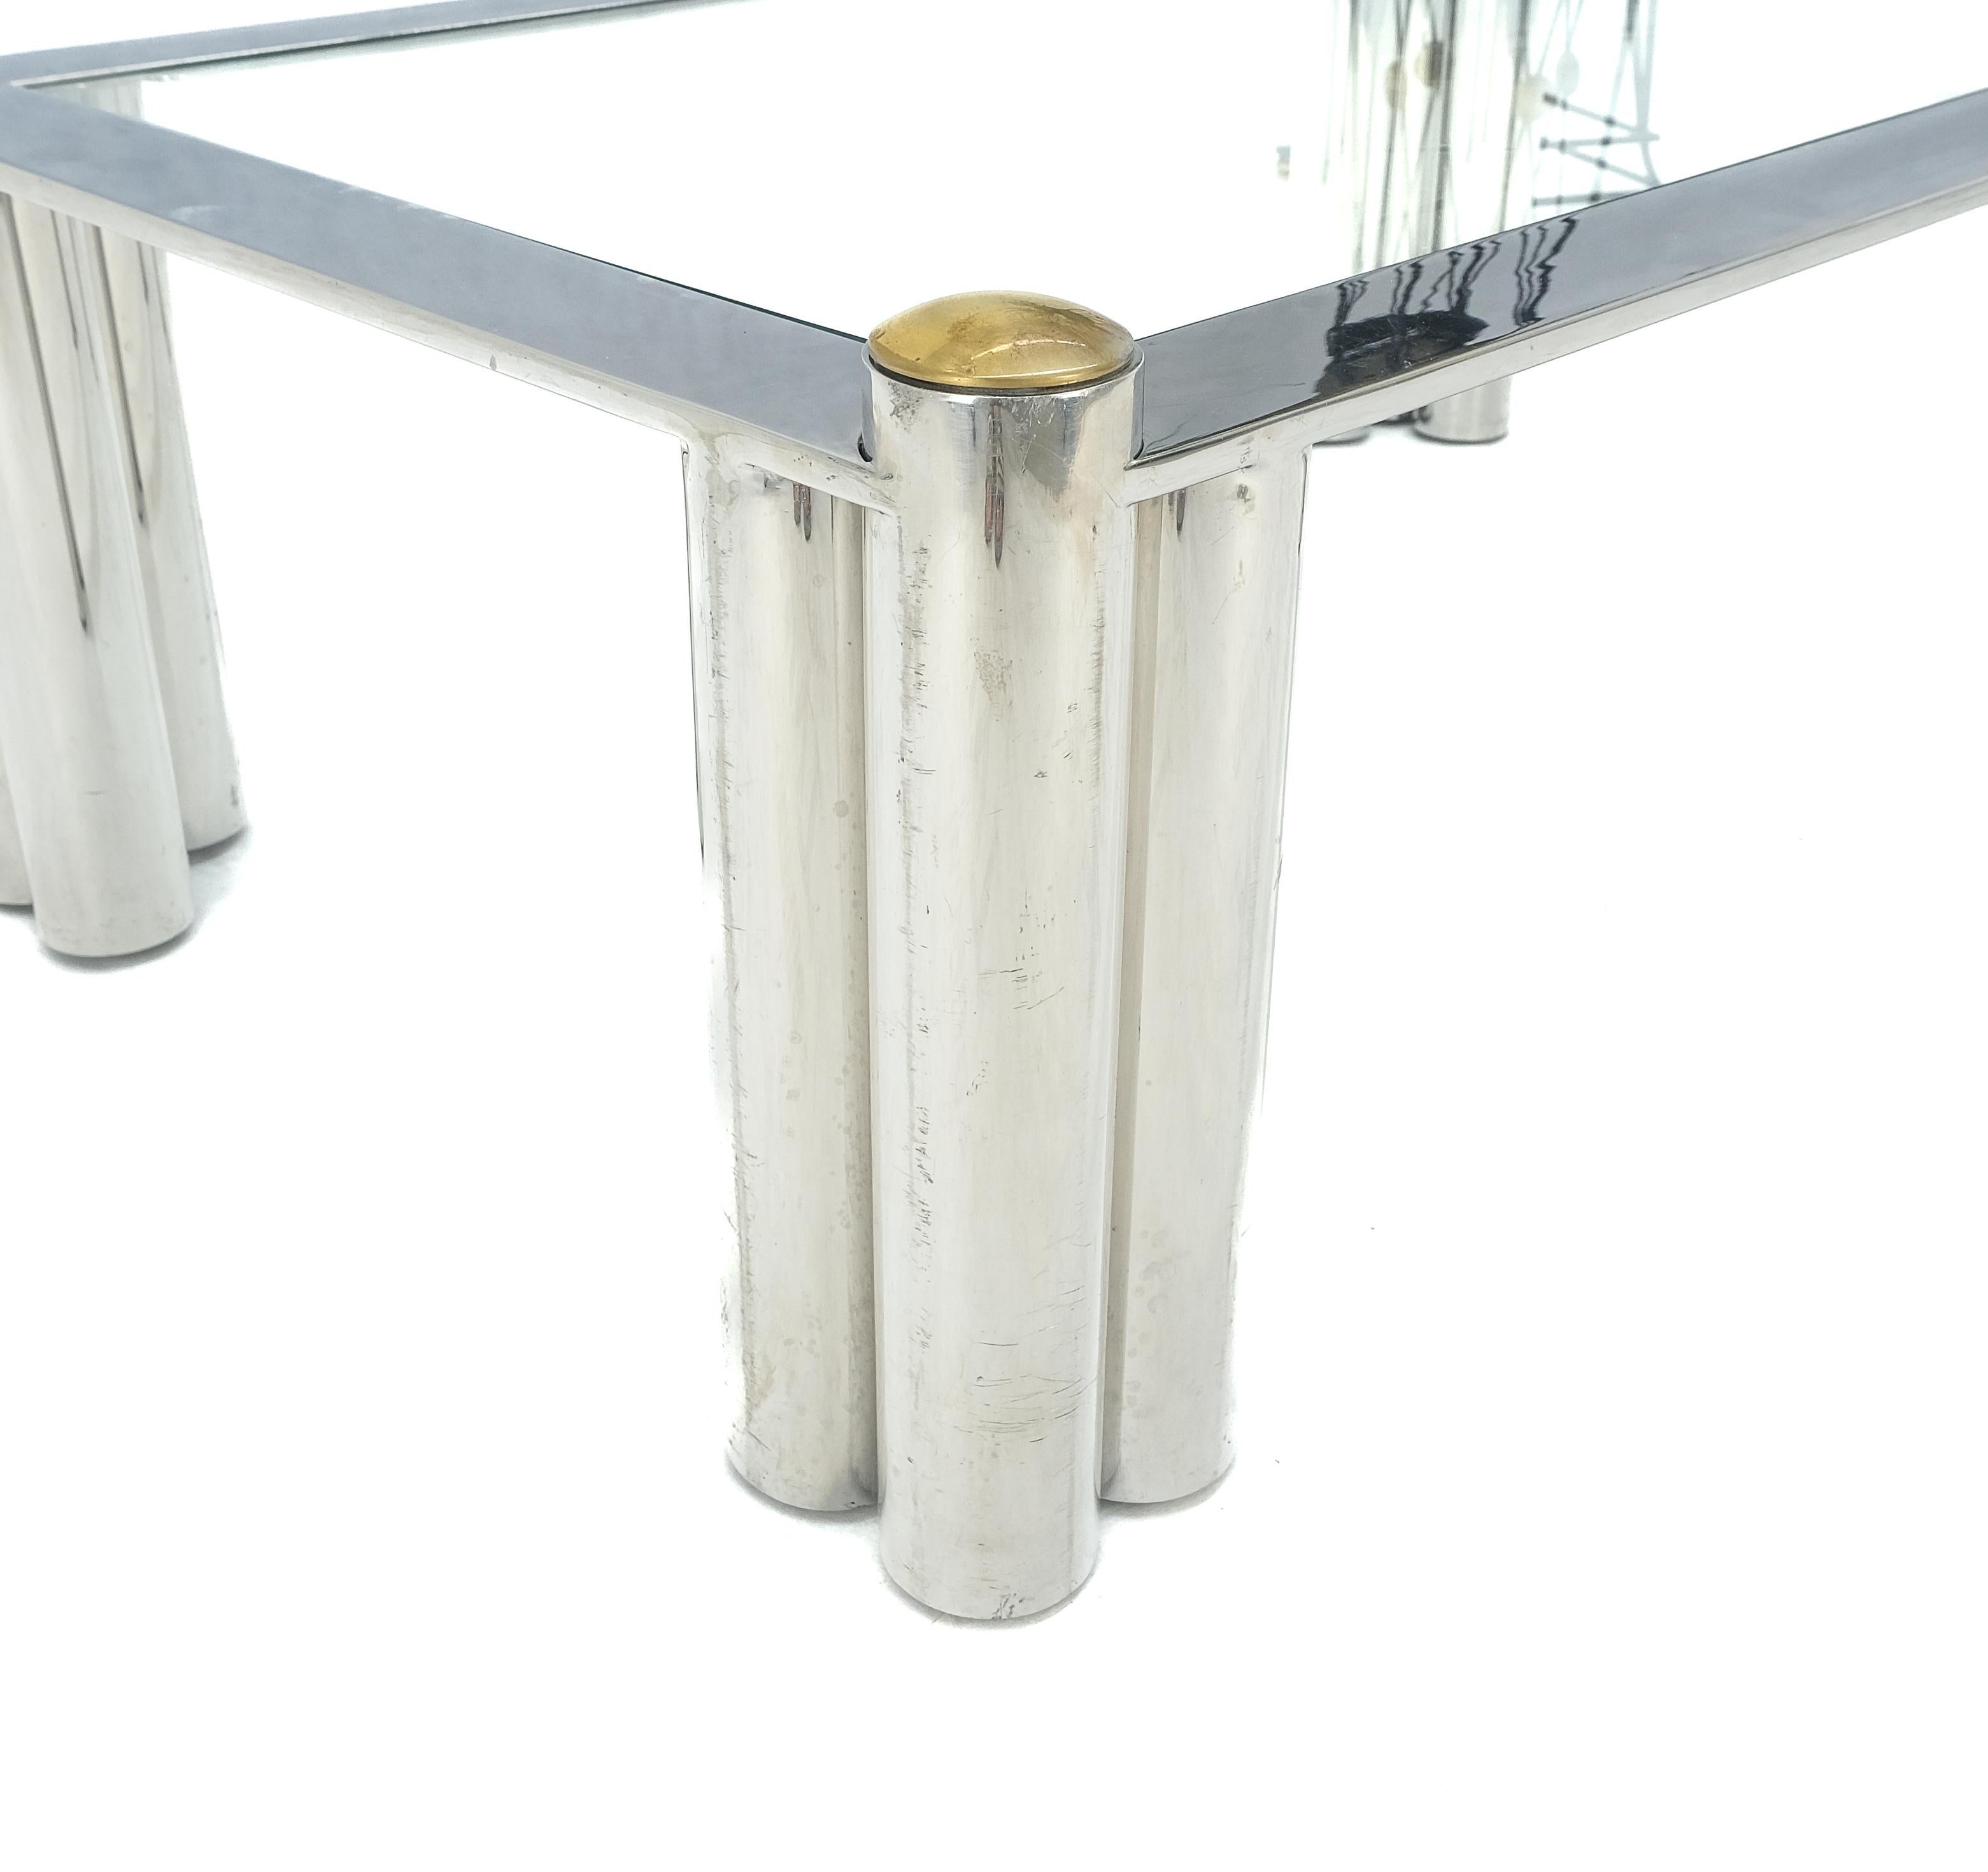 Chrome Finish Stainless Steel Base Triple Cylinder Leg Glass Top Rectangle Coffee Table MINT!
Stylish stainless steel mid century modern rectangular coffee table with brass finials. 
High quality metal workmanship. 